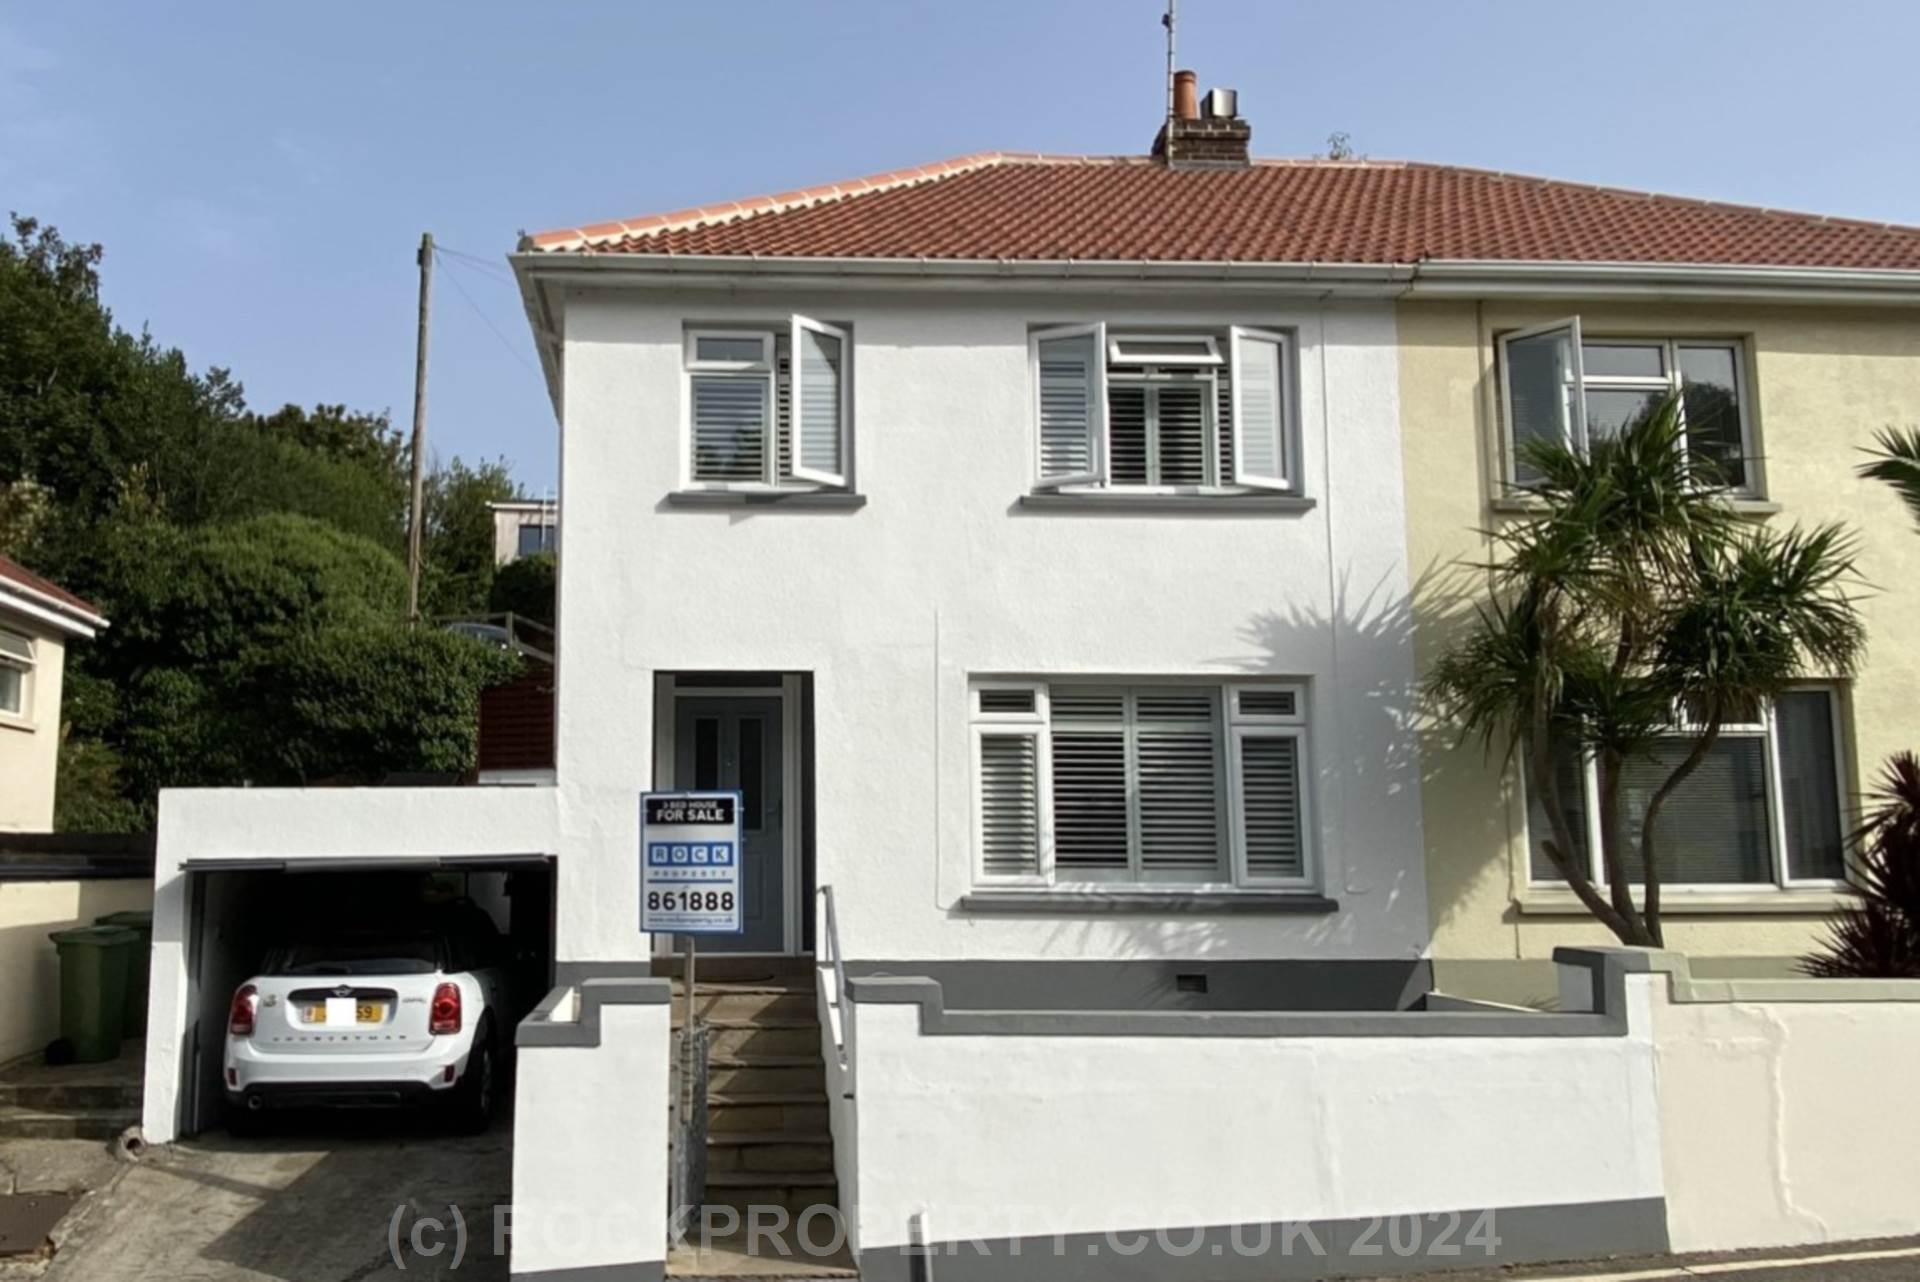 MODERN 3 BED FAMILY HOME, Langley Park, St Saviour, Image 20